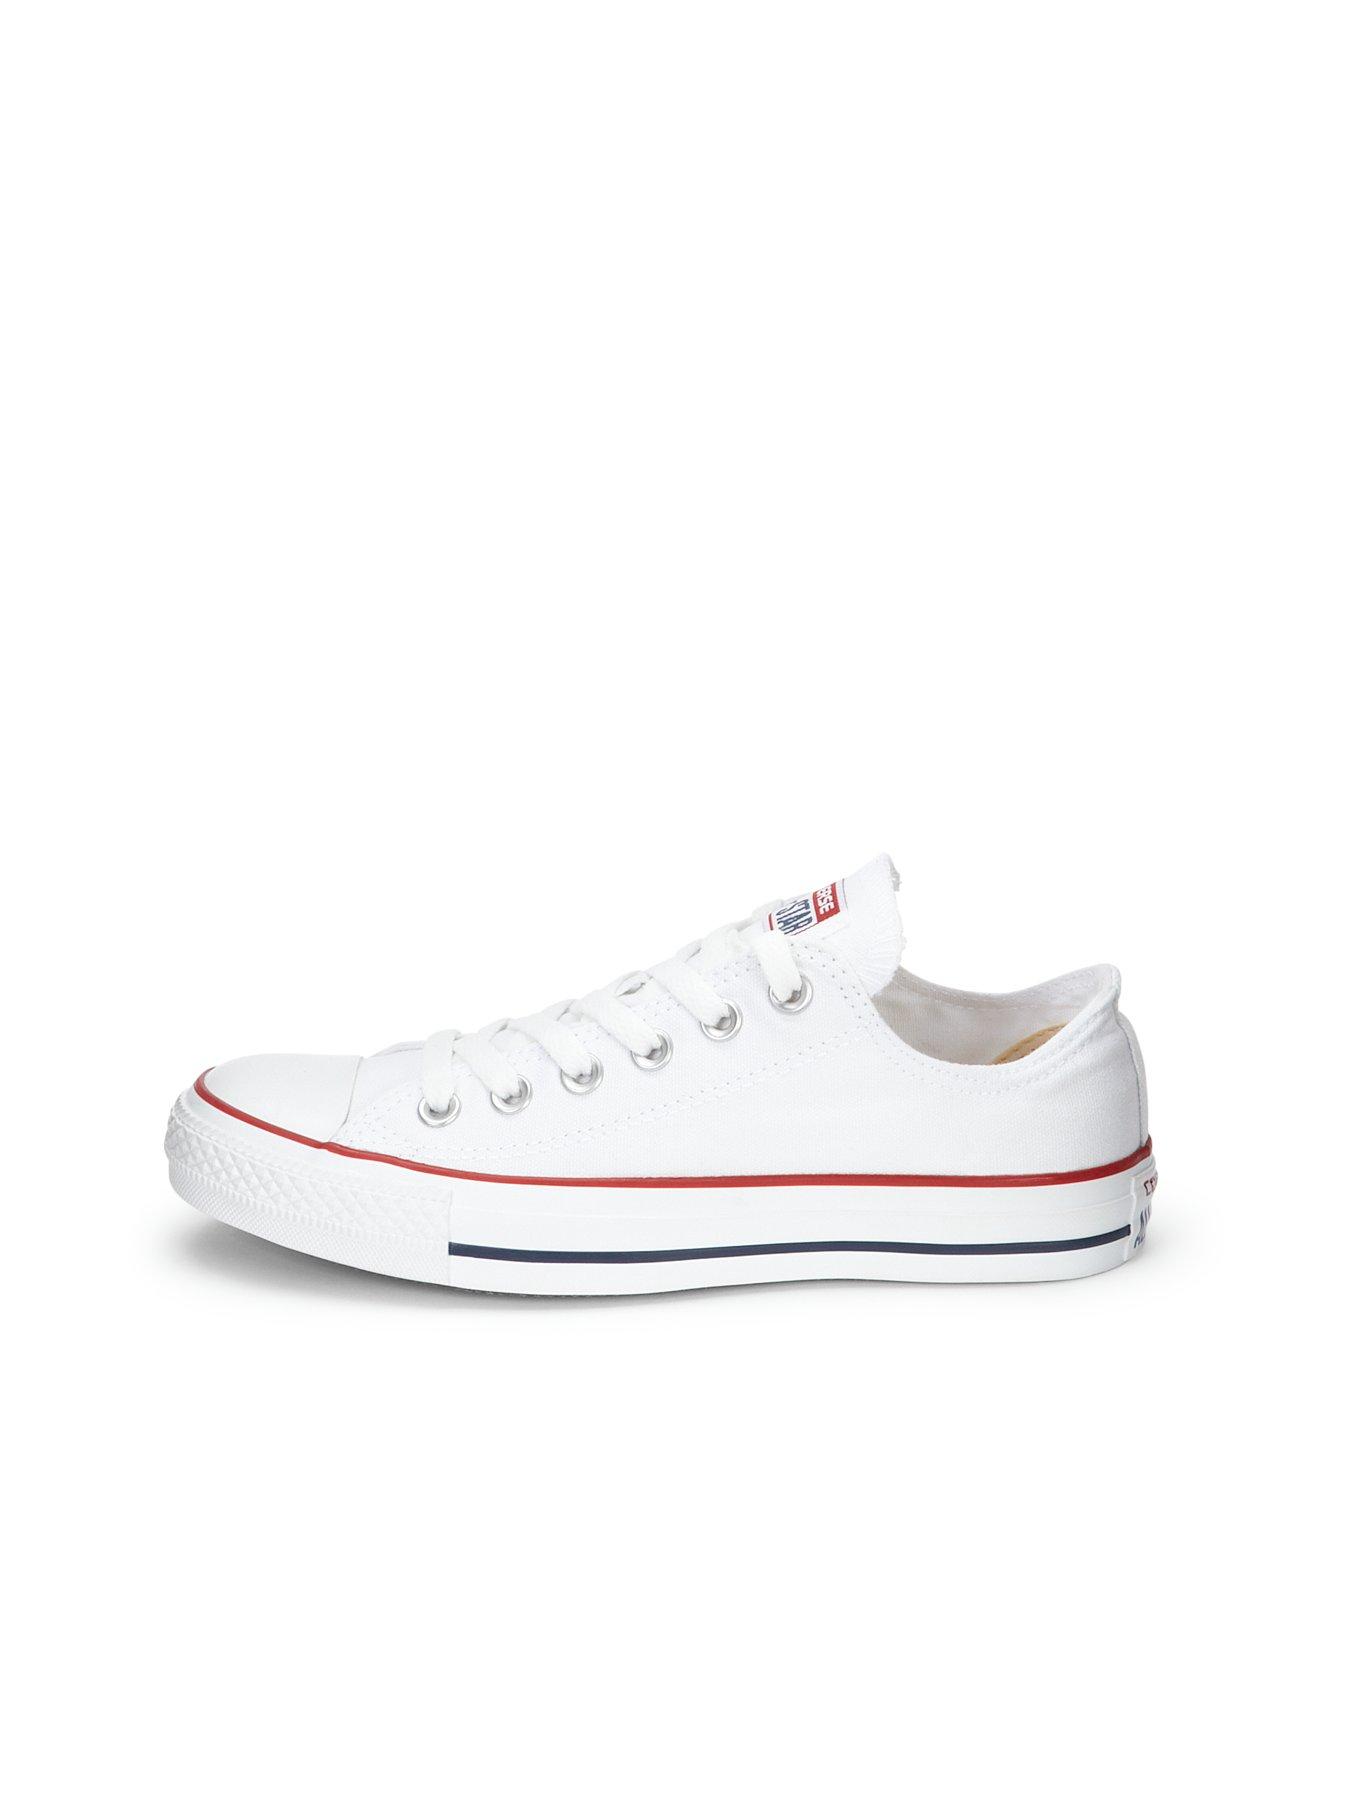 Converse Chuck Taylor All Star Ox Plimsolls - White | very.co.uk